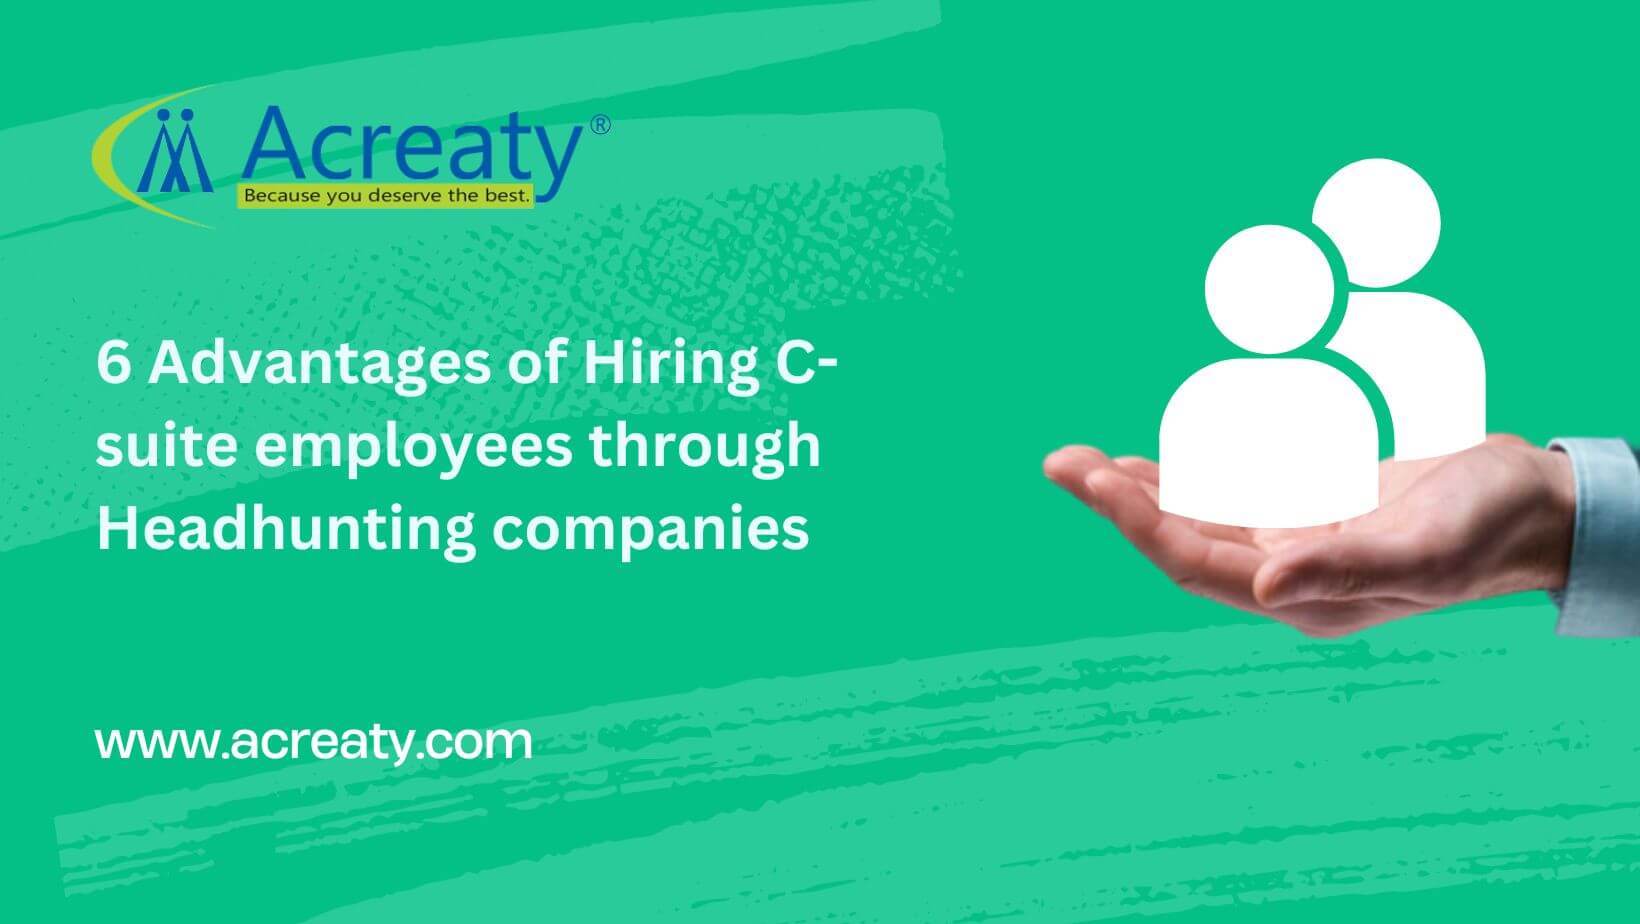 6 Advantages of Hiring C-suite employees through Headhunting companies